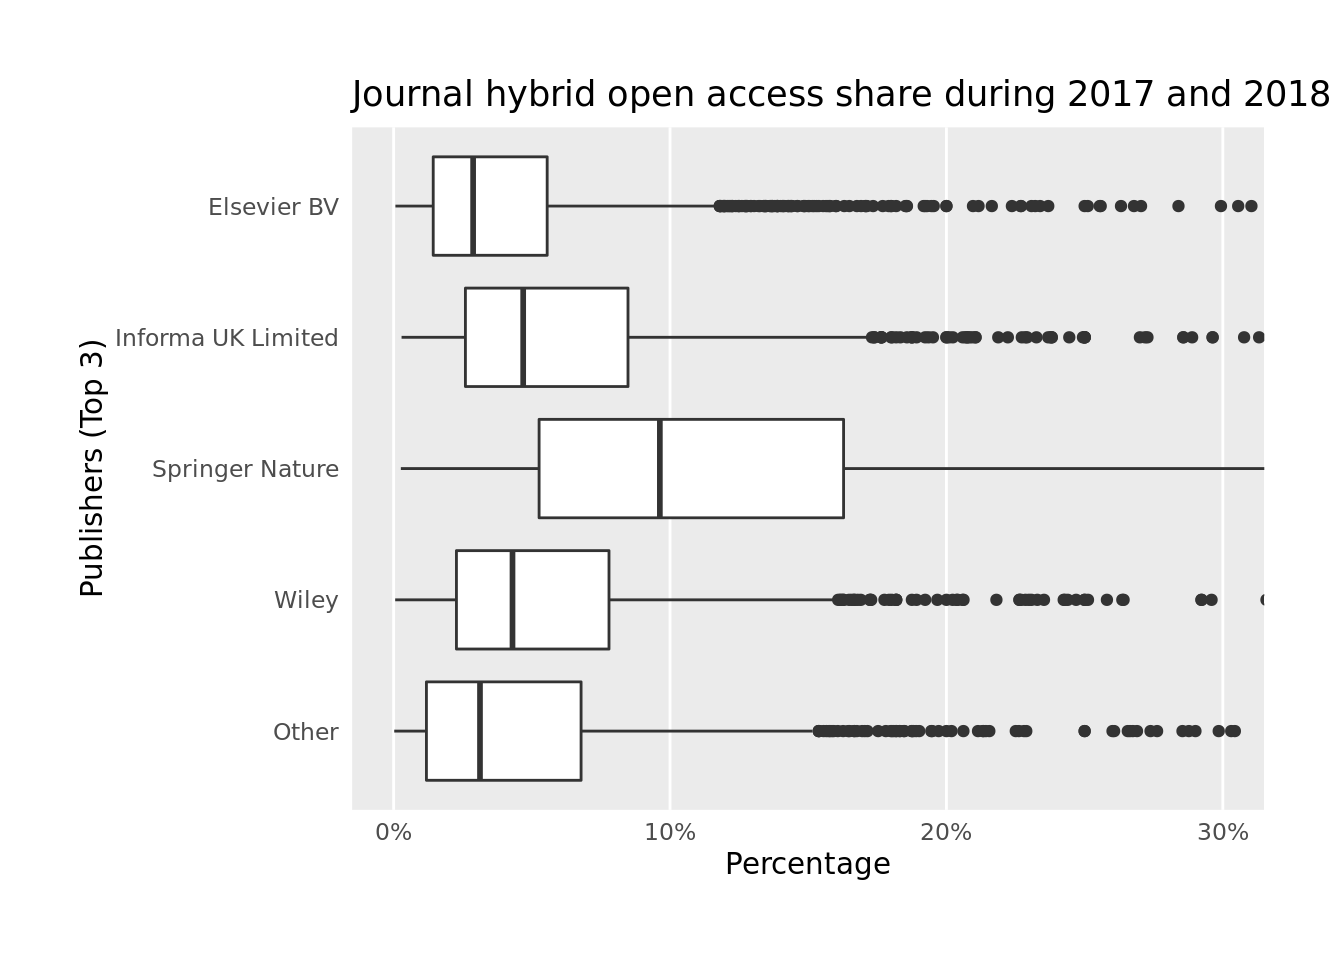 Spread and differences of the share of open access articles